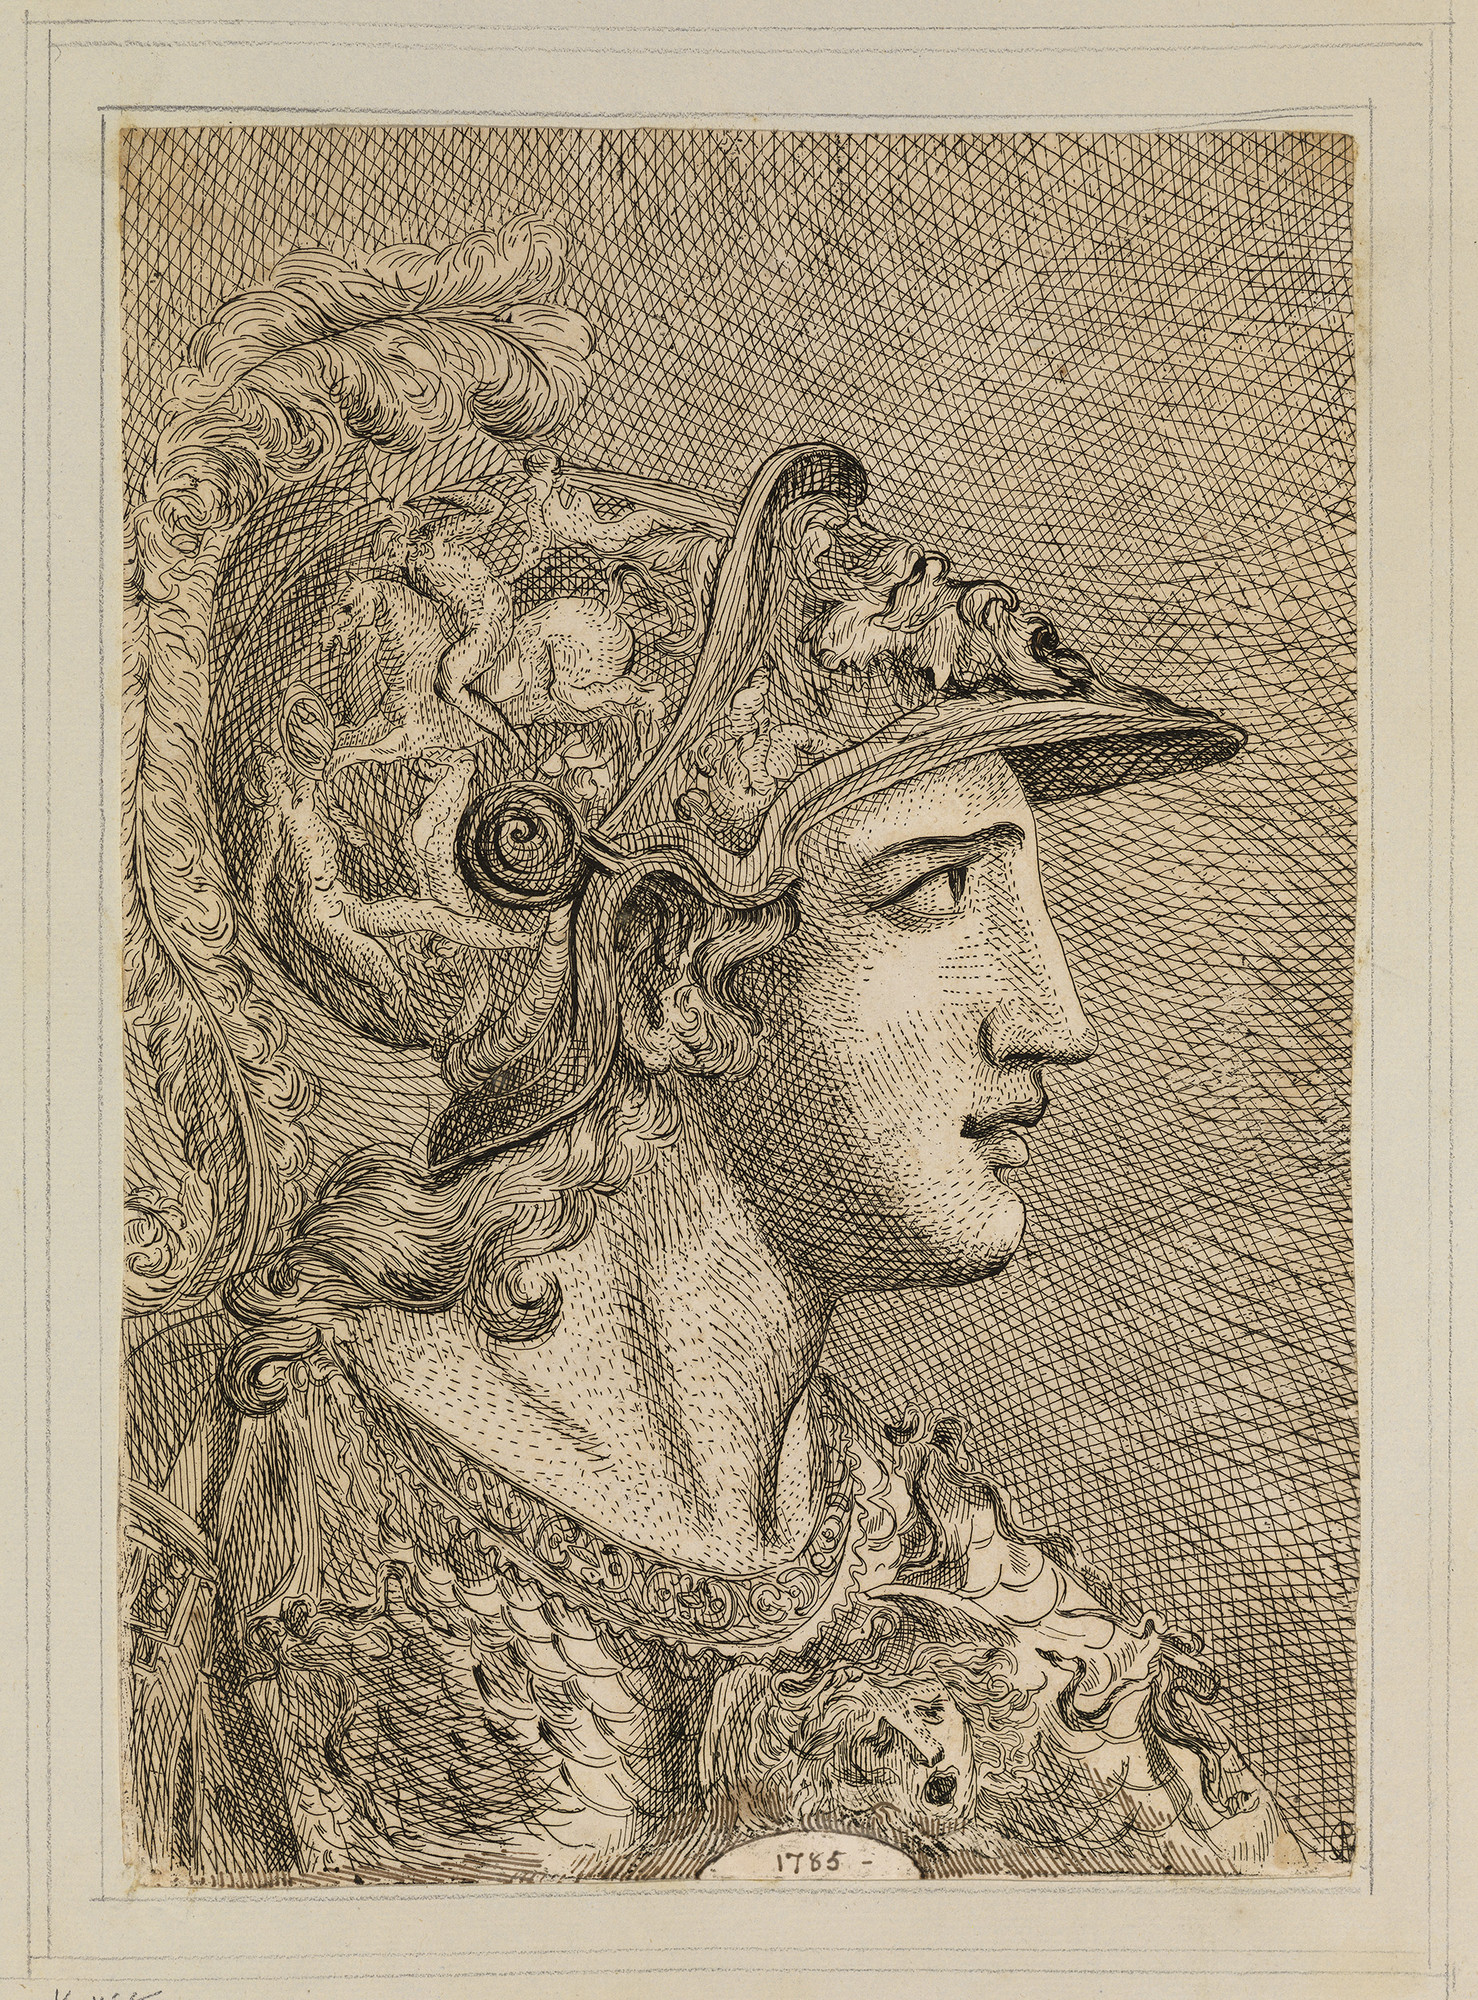 An etching showing the head of Minerva, after a drawing by Giulio Clovio (RCIN 990453). She is shown facing right in profile and is wearing a heavily decorated helmet and breastplate. Amendments and the date 1785 -&nbsp; have been added in pen and ink to 